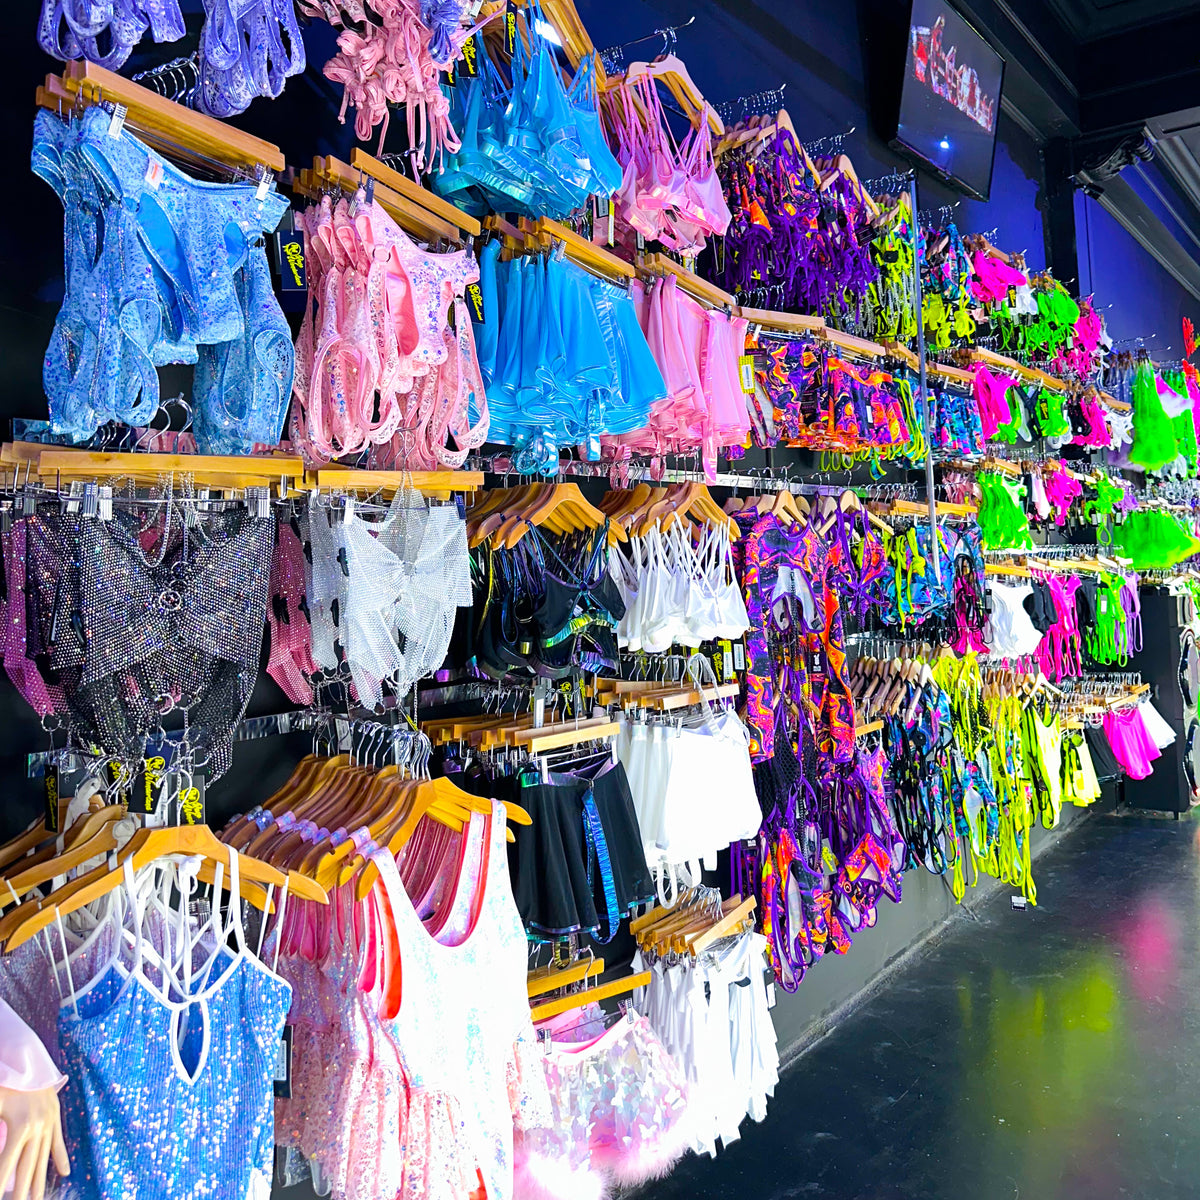 CALLING ALL RAVERS 🔊 The @ravewonderland store in Los Angeles is